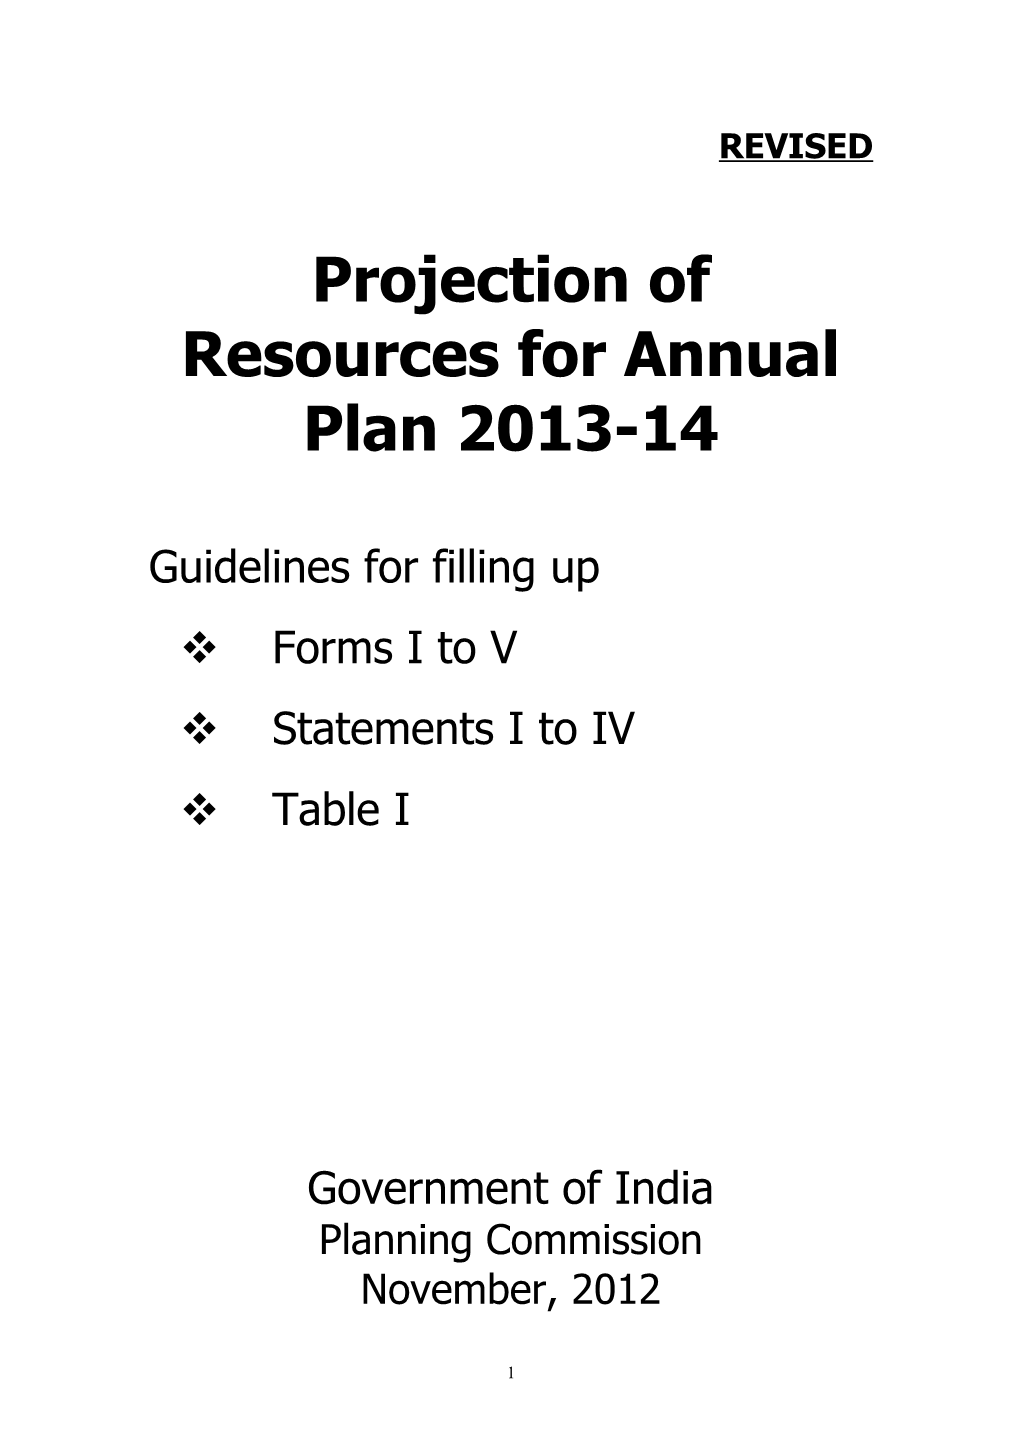 Projection of Resources for Annual Plan 2013-14